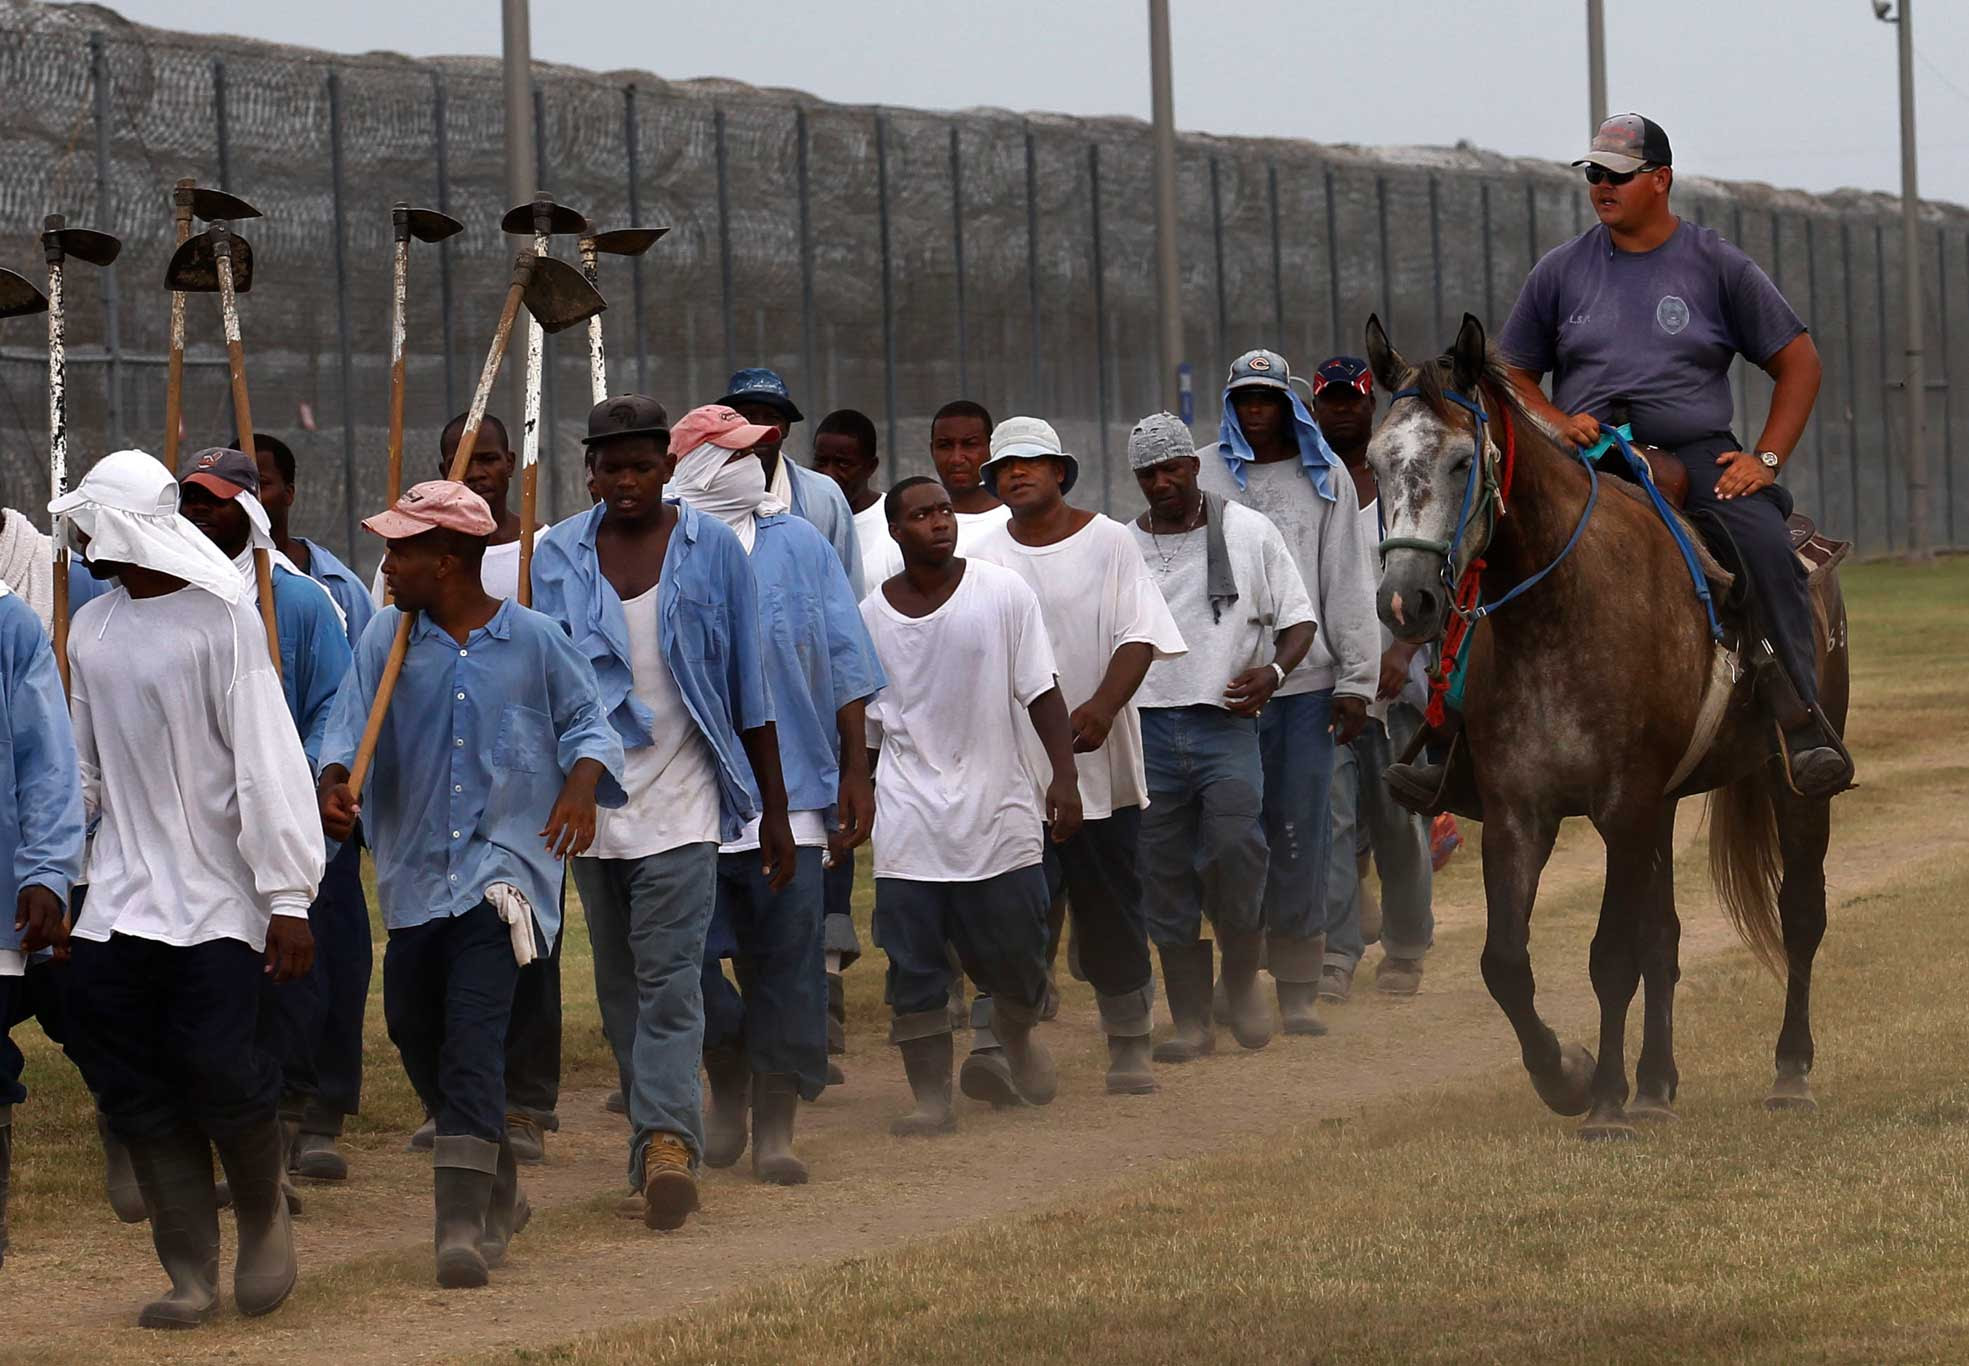 A prison guard oversees incarcerated people as they return to the dorms from farm work detail at the Louisiana State Penitentiary in Angola, La., on Aug. 18, 2011. The guard rides atop a horse that was broken in and trained by incarcerated people. (Image: AP Photo/Gerald Herbert)